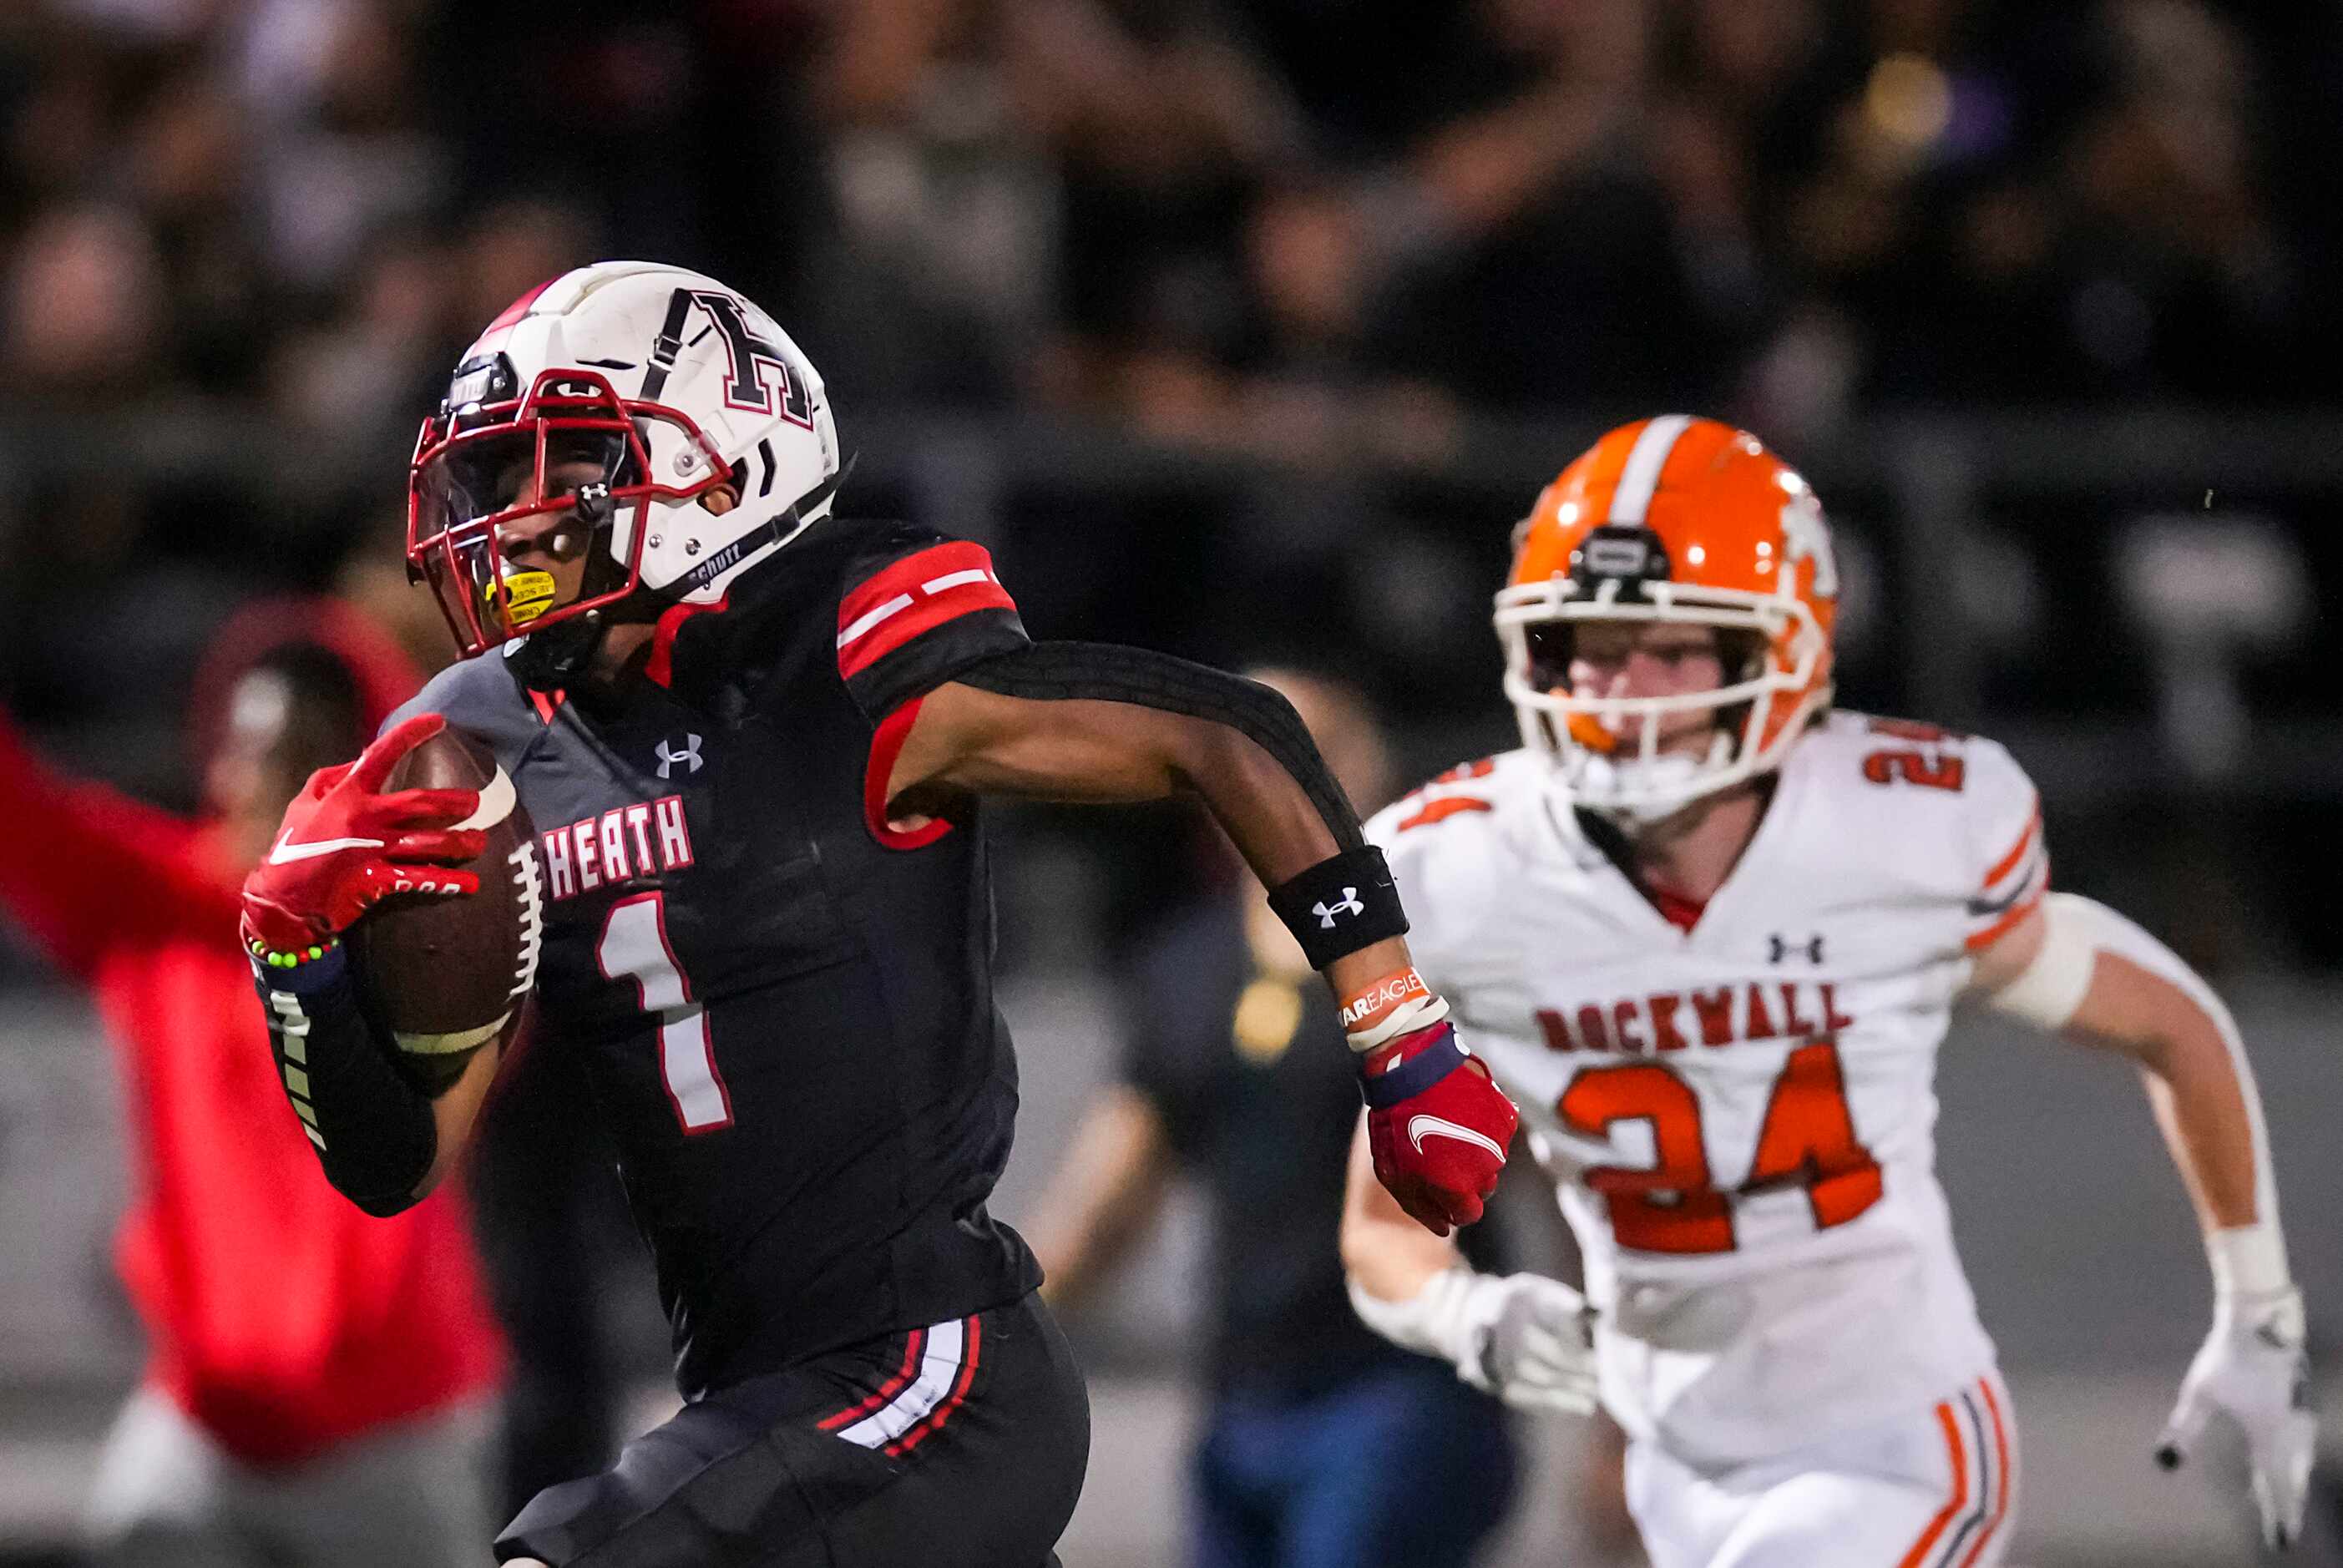 Rockwall-Heath wide receiver Jay Fair (1) races to the end zone on a 69-yard touchdown...